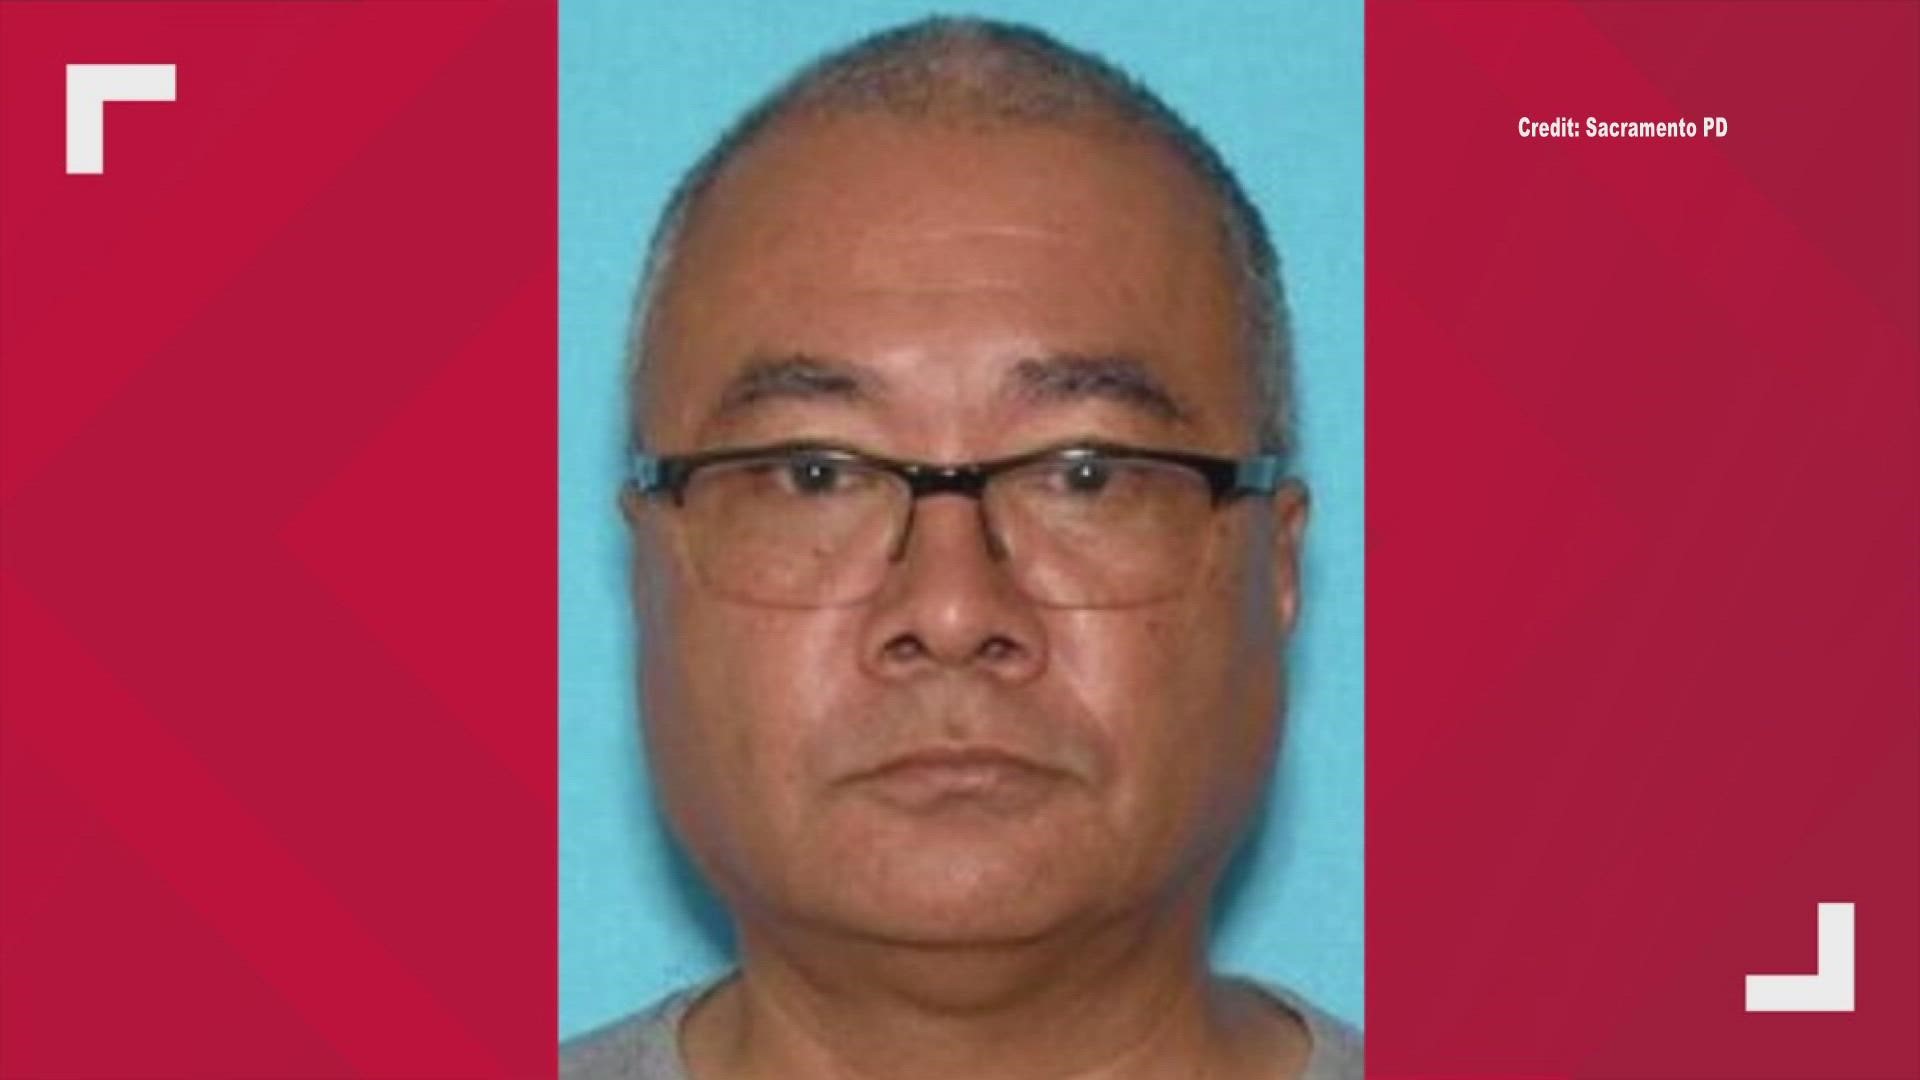 Kim Wilson, 62, was arrested on 17 counts of lewd acts with a child and one count of child pornography, according to the Sacramento Police Department.